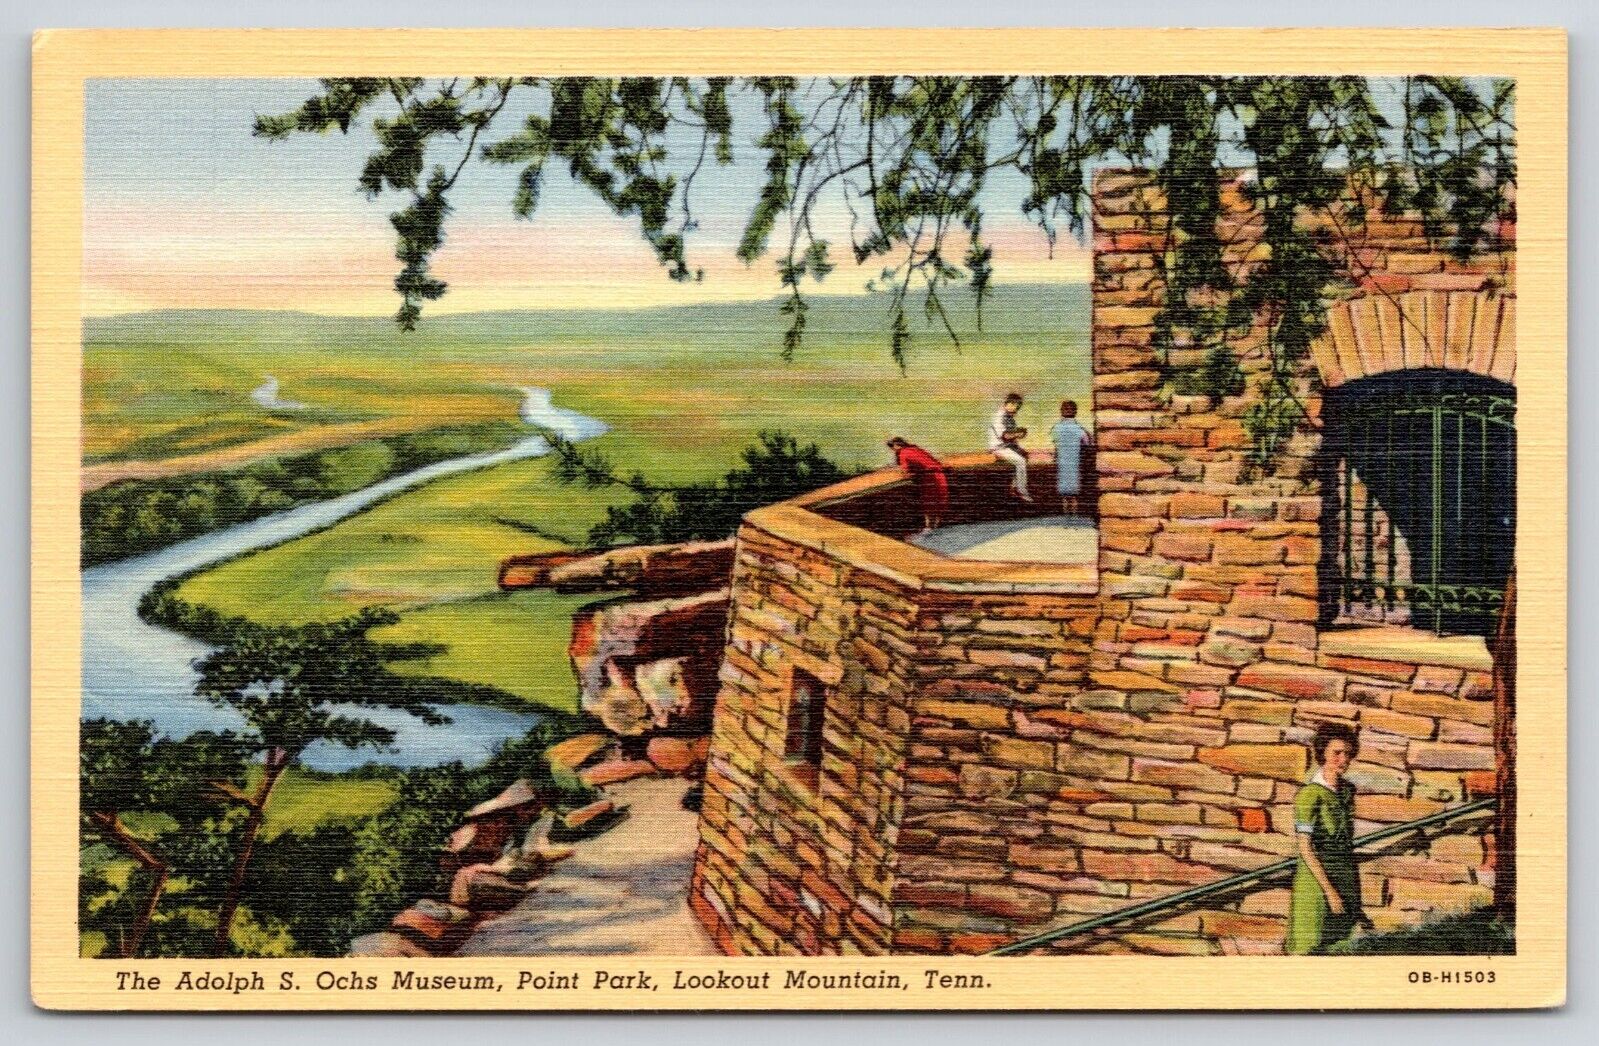 Adolph S. Ochs Museum and Observatory Point Park Lookout Mountain TN Postcard